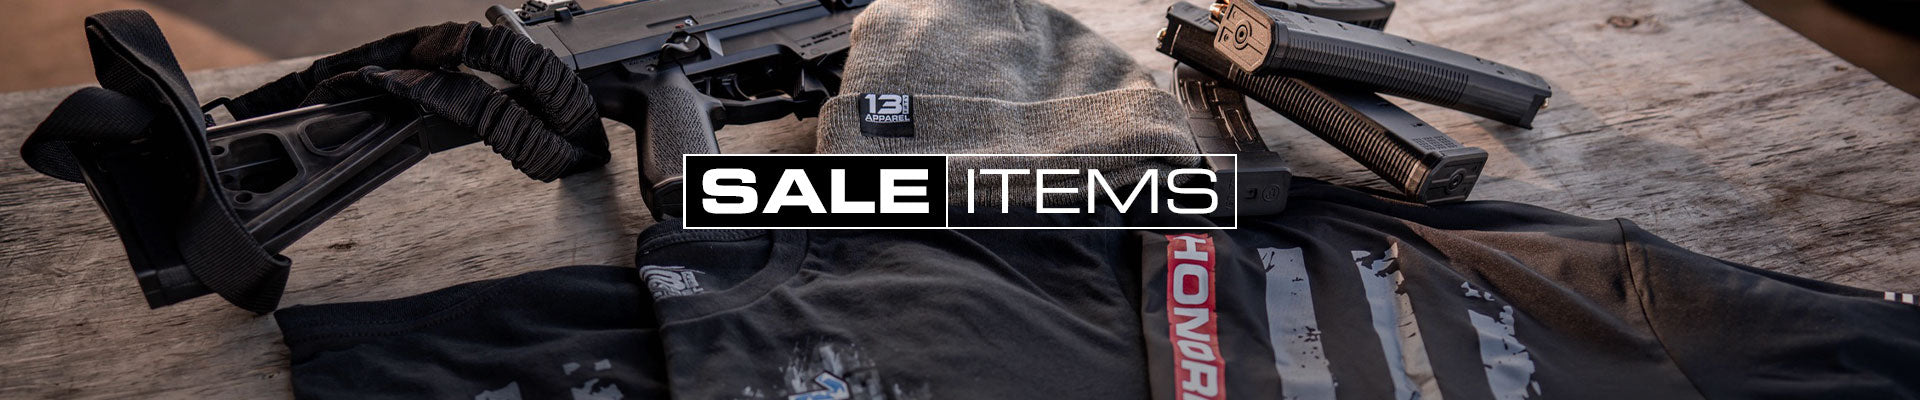 SALE ITEMS-13 Fifty Apparel